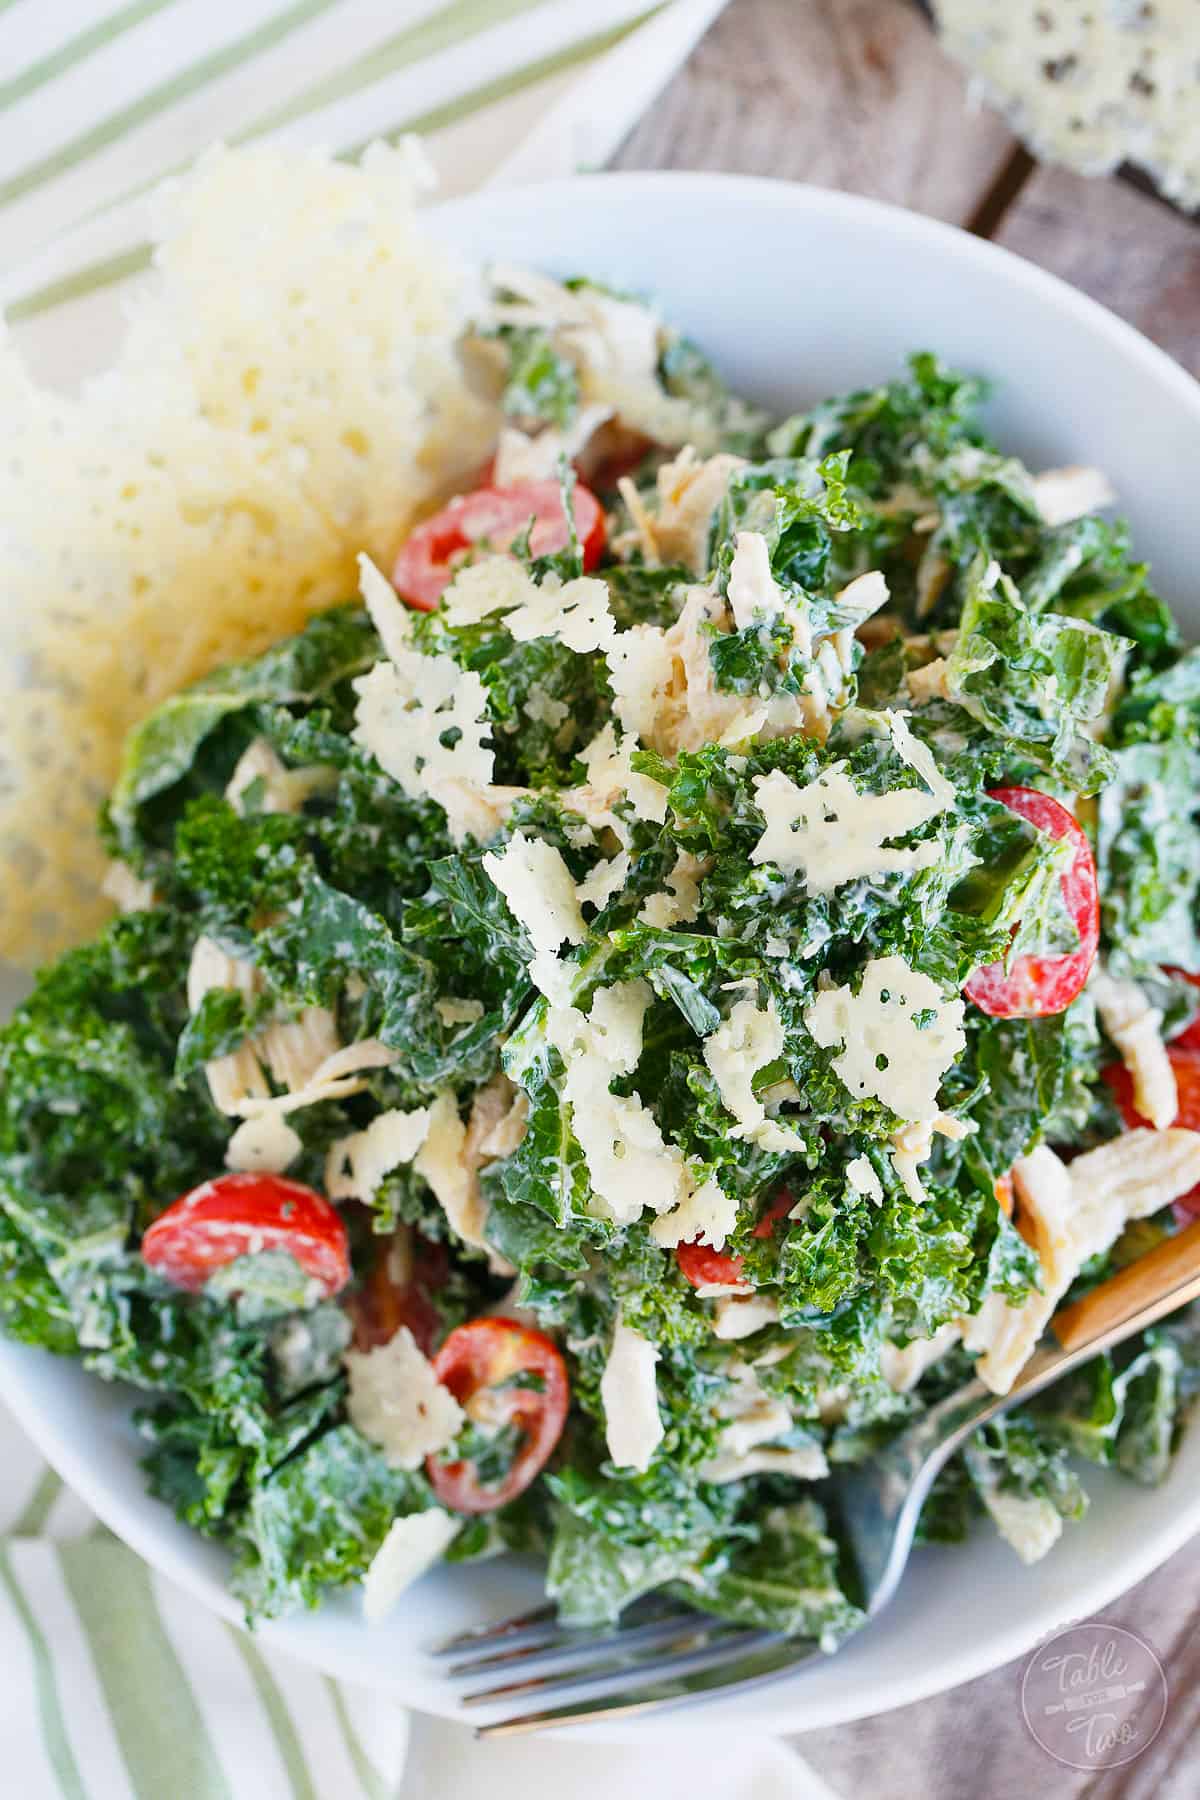 Shredded Chicken Kale Caesar Salad with Parmesan Crisps - Table for Two